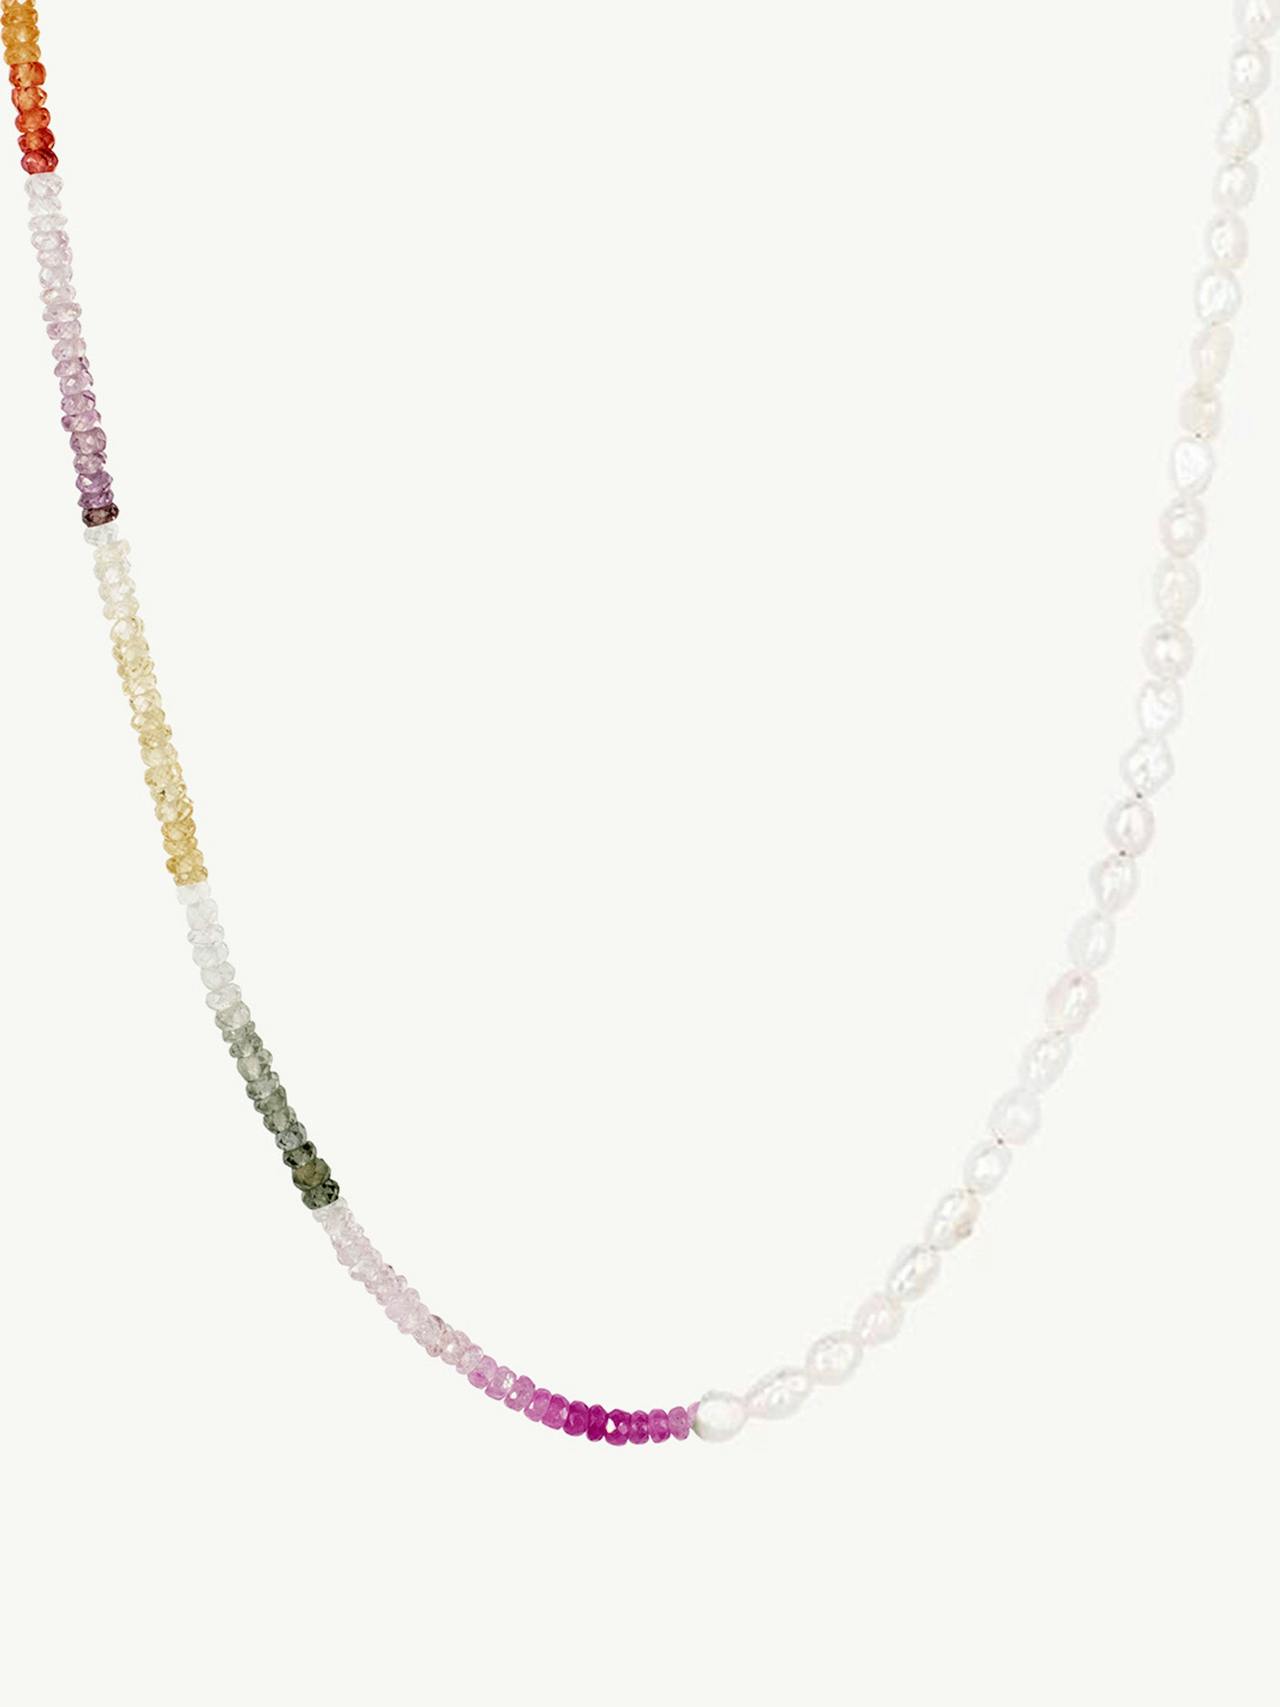 Can't decide rainbow pearl necklace